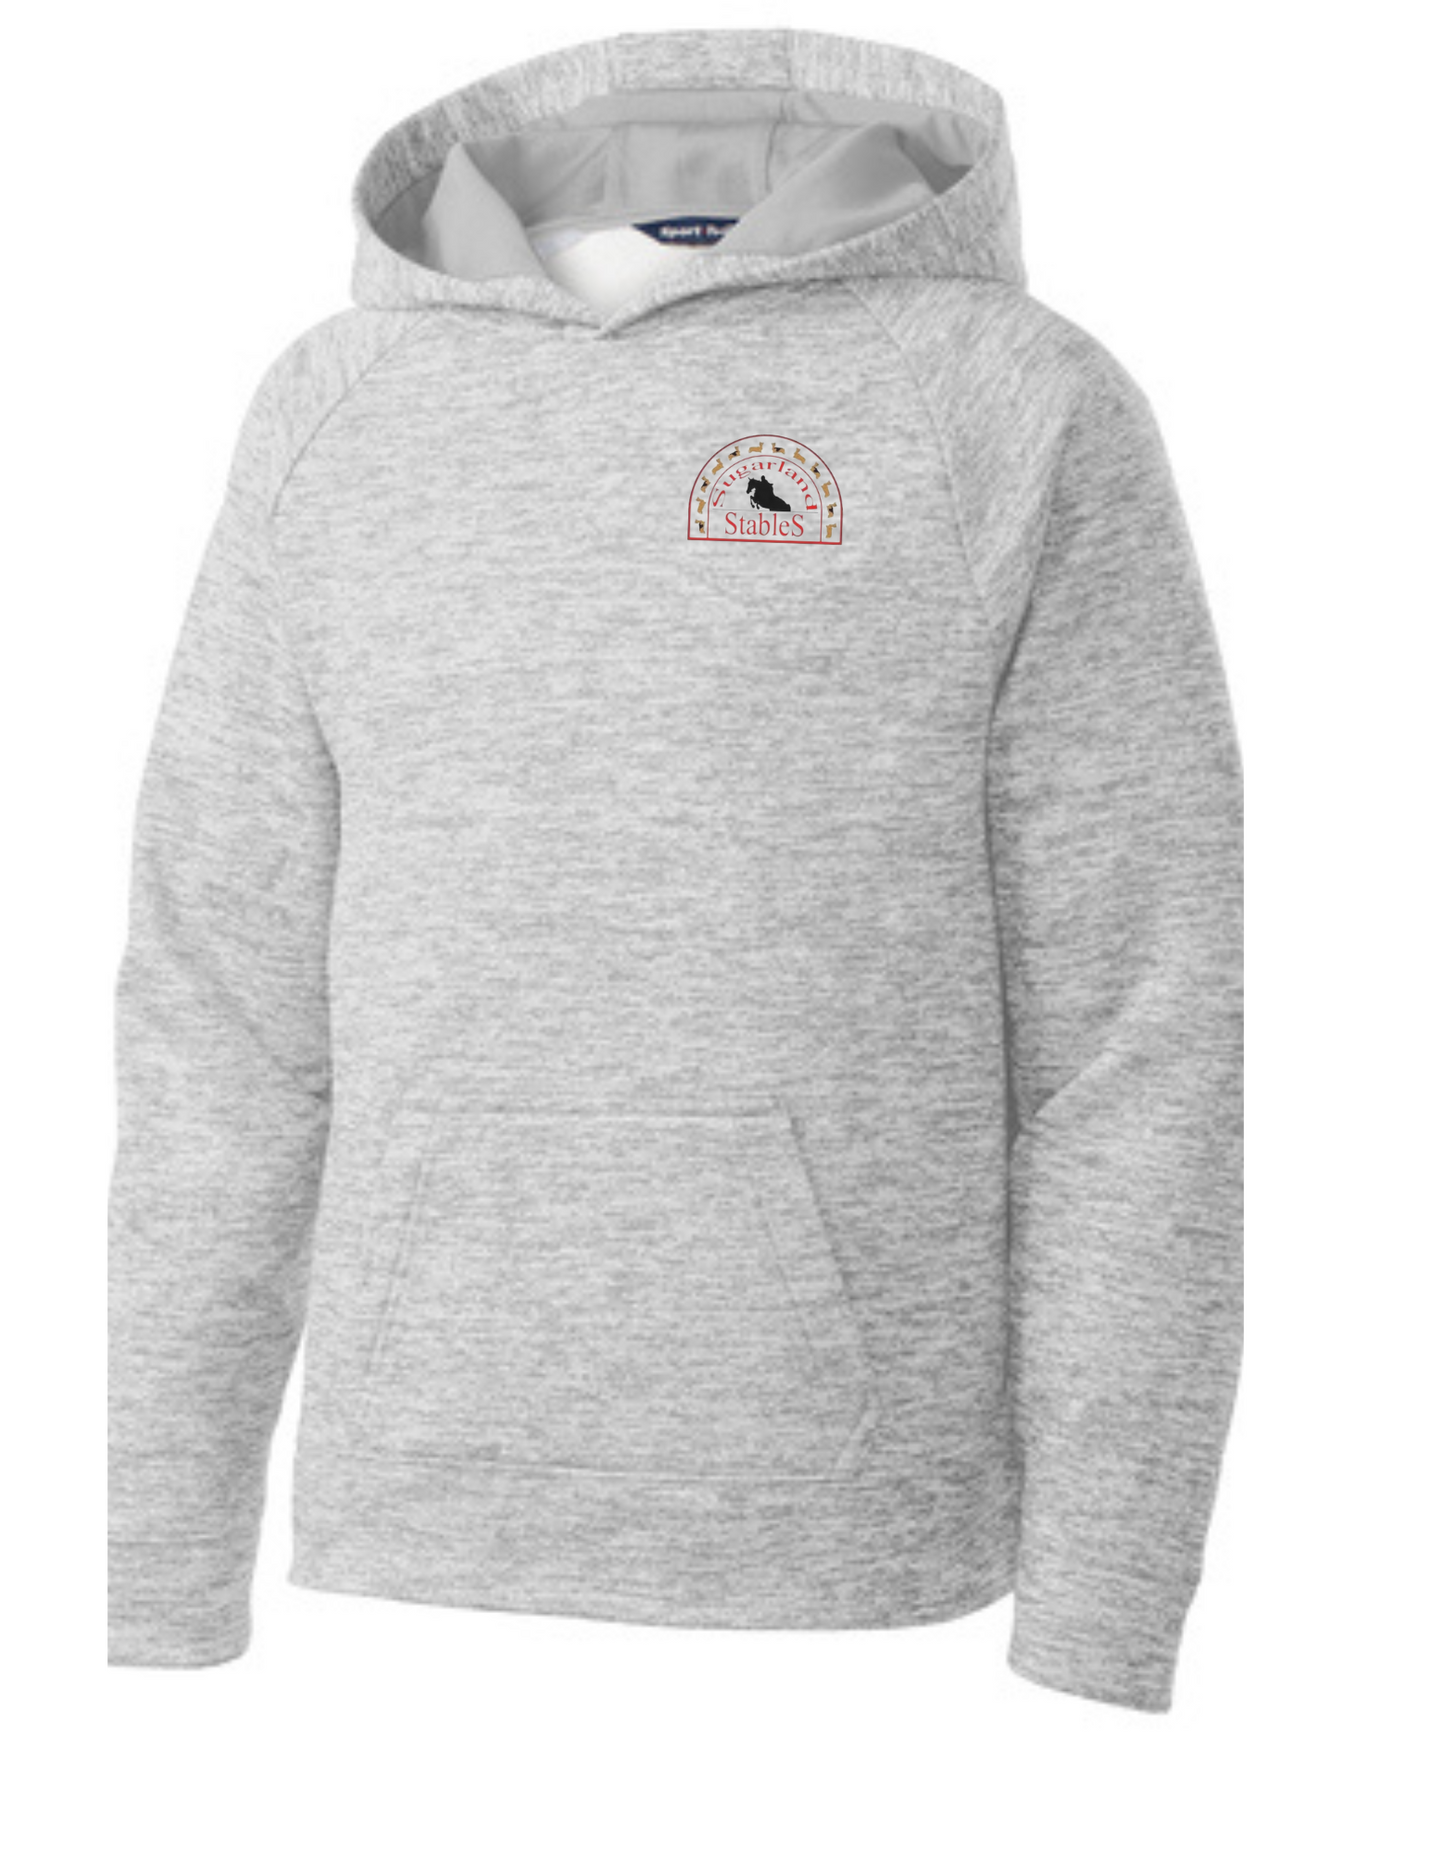 Sugarland Stables - Sport-Tek® Youth PosiCharge® Electric Heather Fleece Hooded Pullover